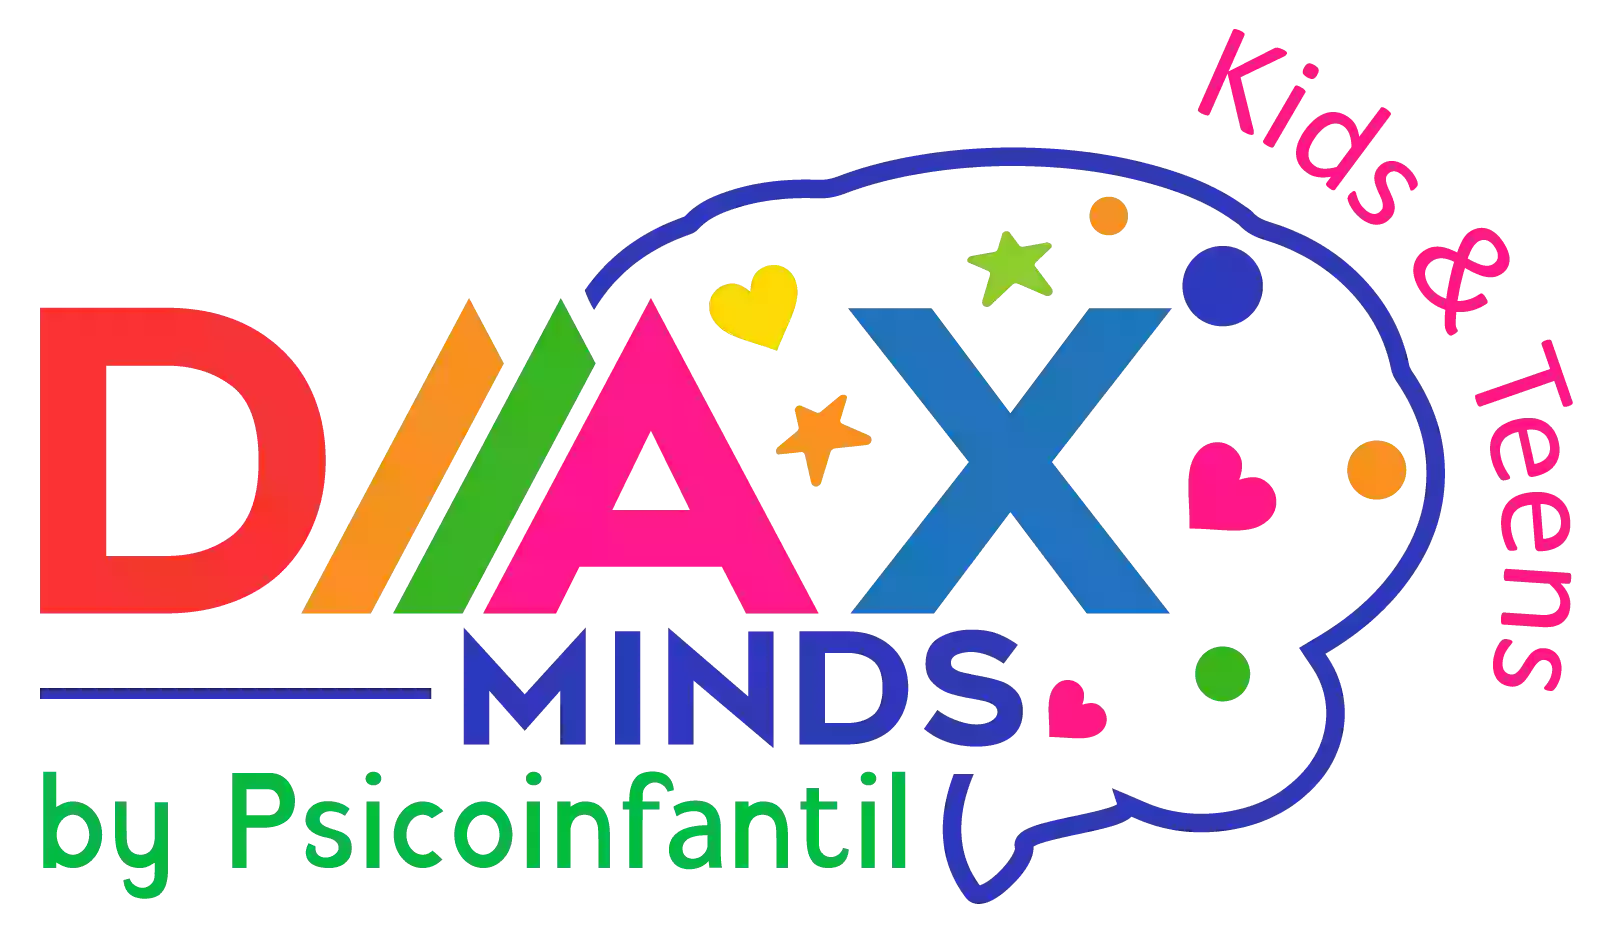 Daaax Minds by Psicoinfantil